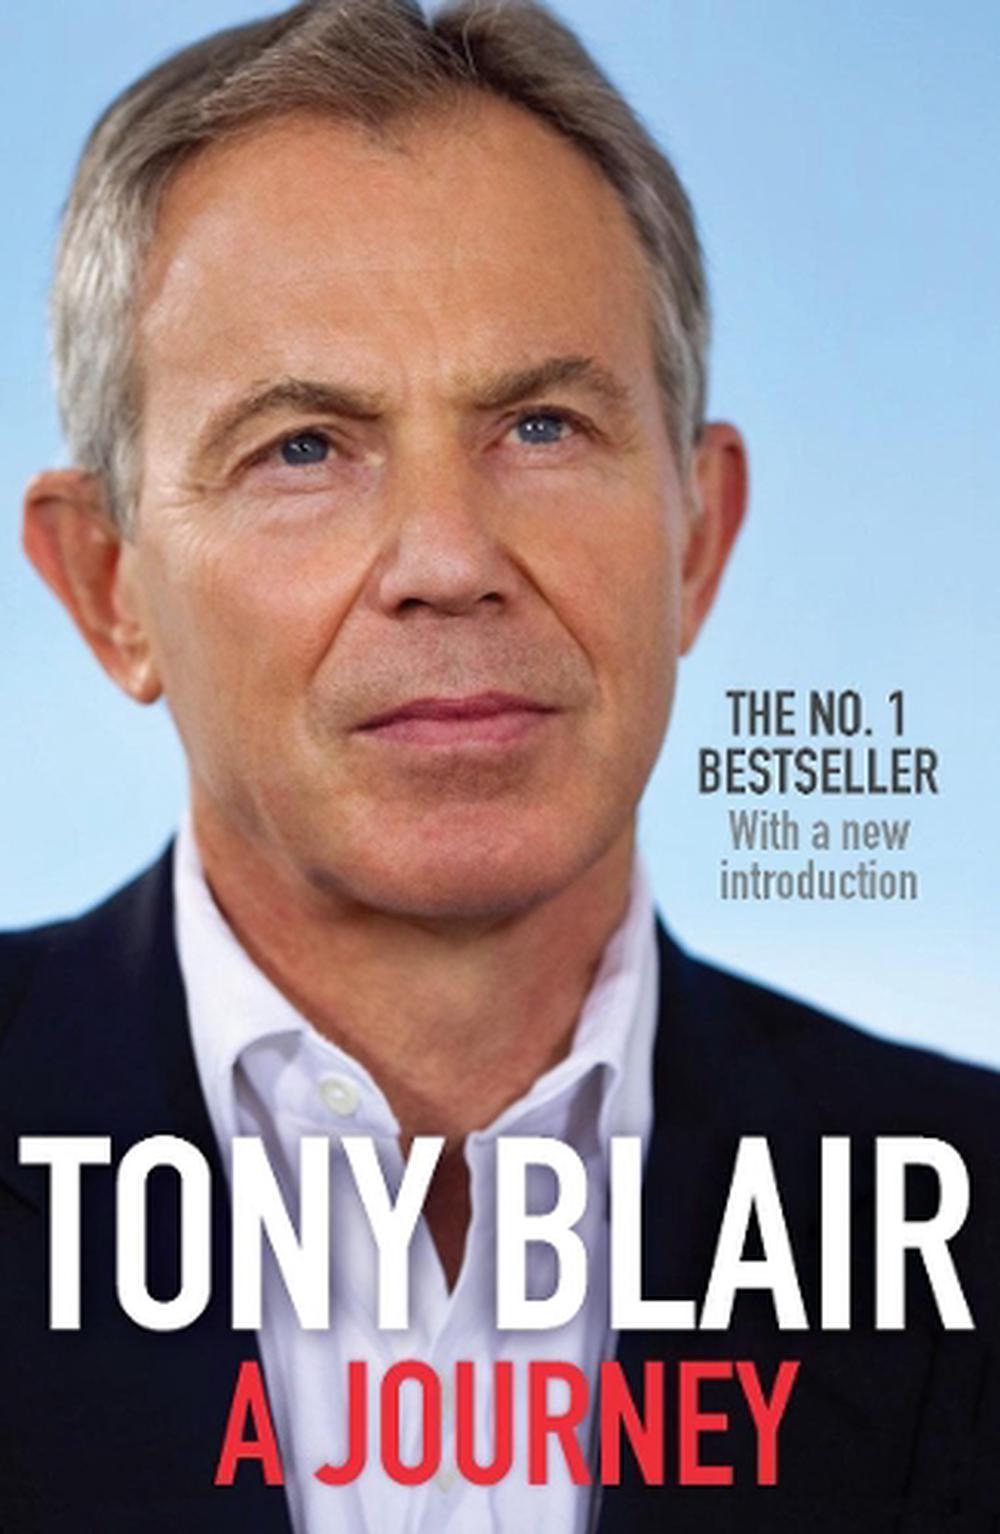 Journey by Tony Blair, Paperback, 9780099525097 | Buy online at The Nile